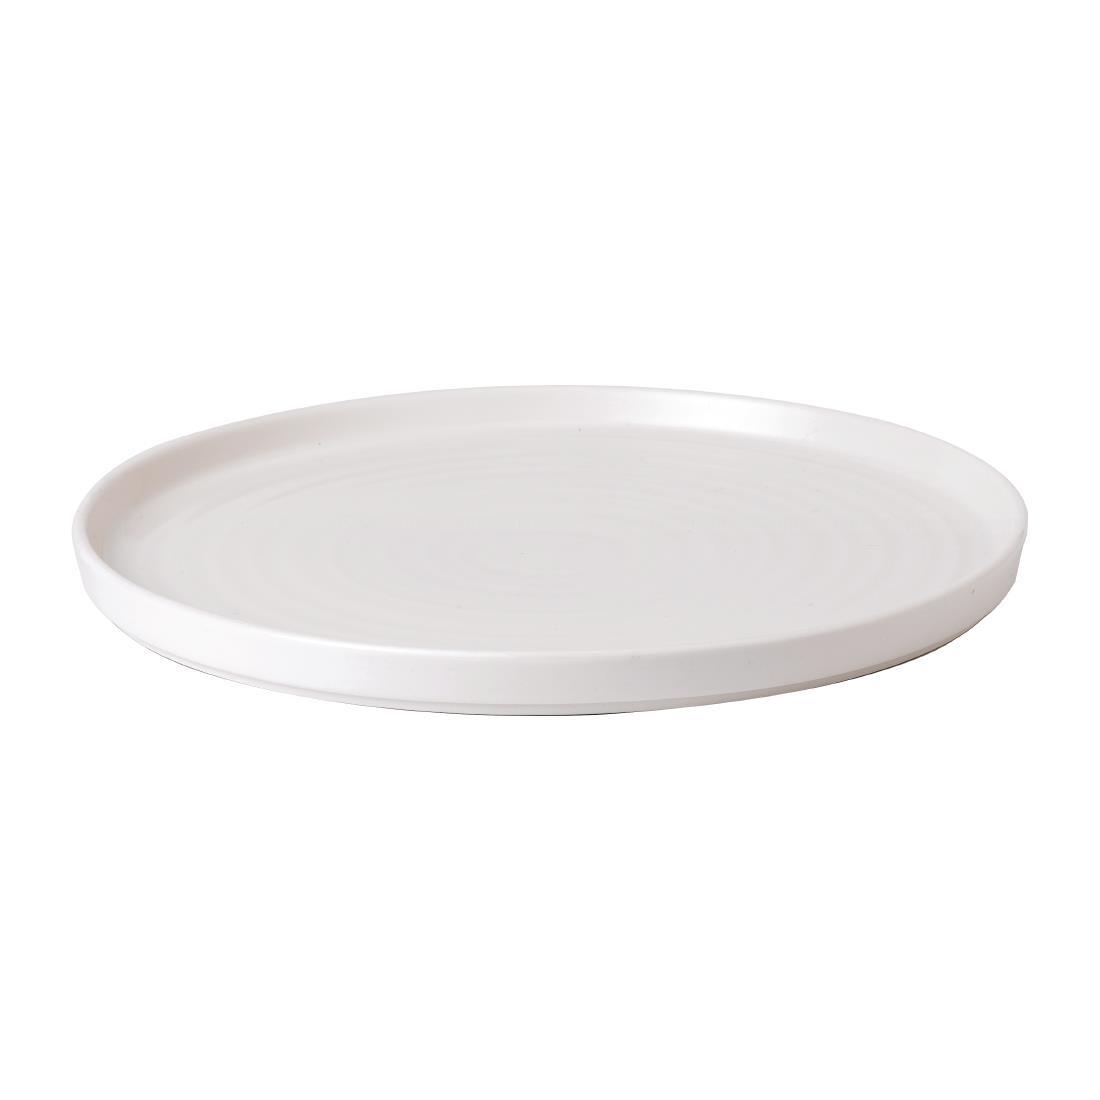 White Walled Plate 10 3/4 " (Box 6) - FE944  - 2